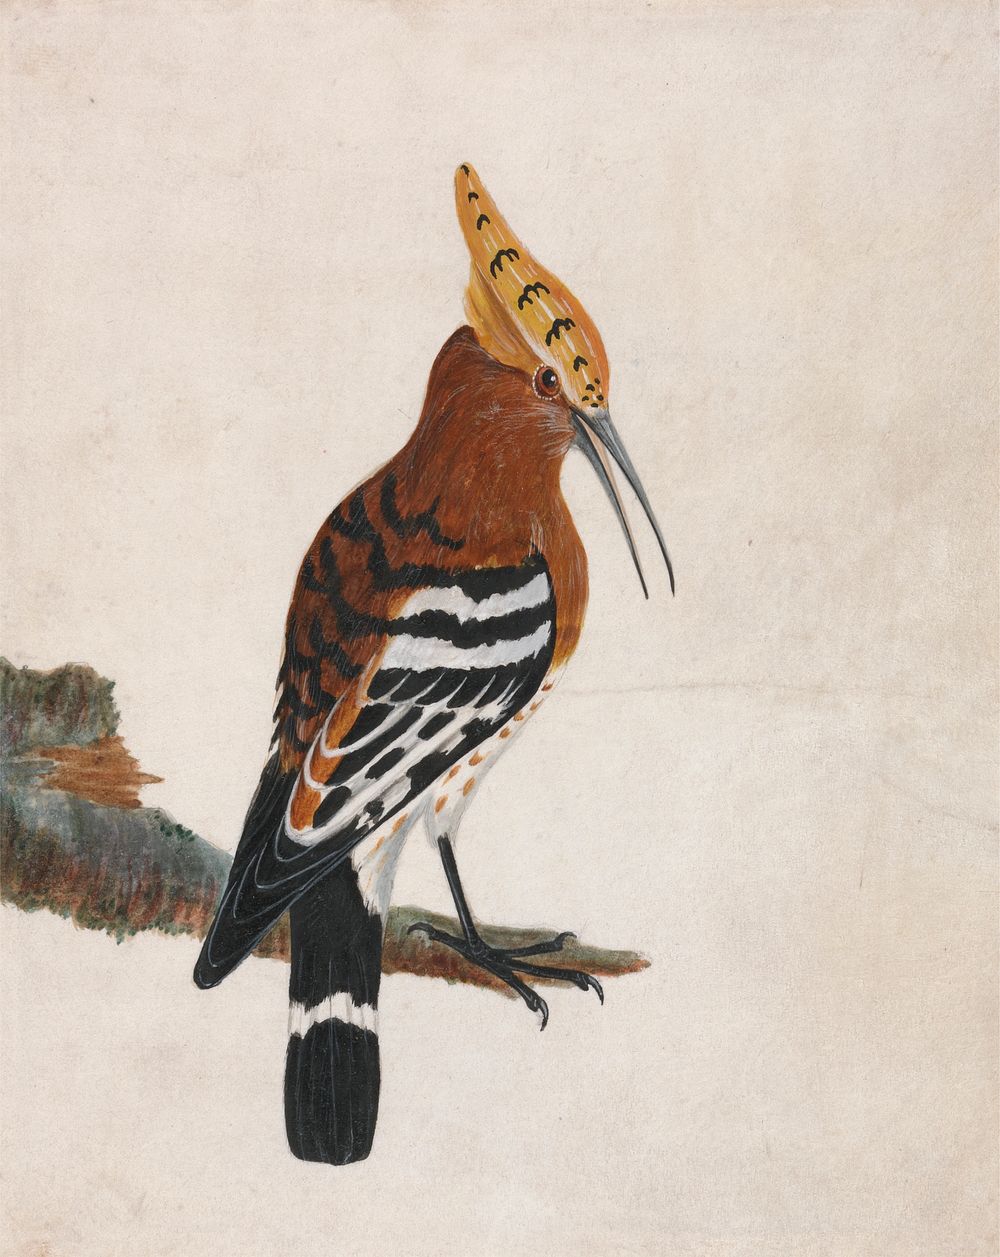 Hoopoe: Common Hoopoe (ca. 1790) painting in high resolution by William Lewin.  